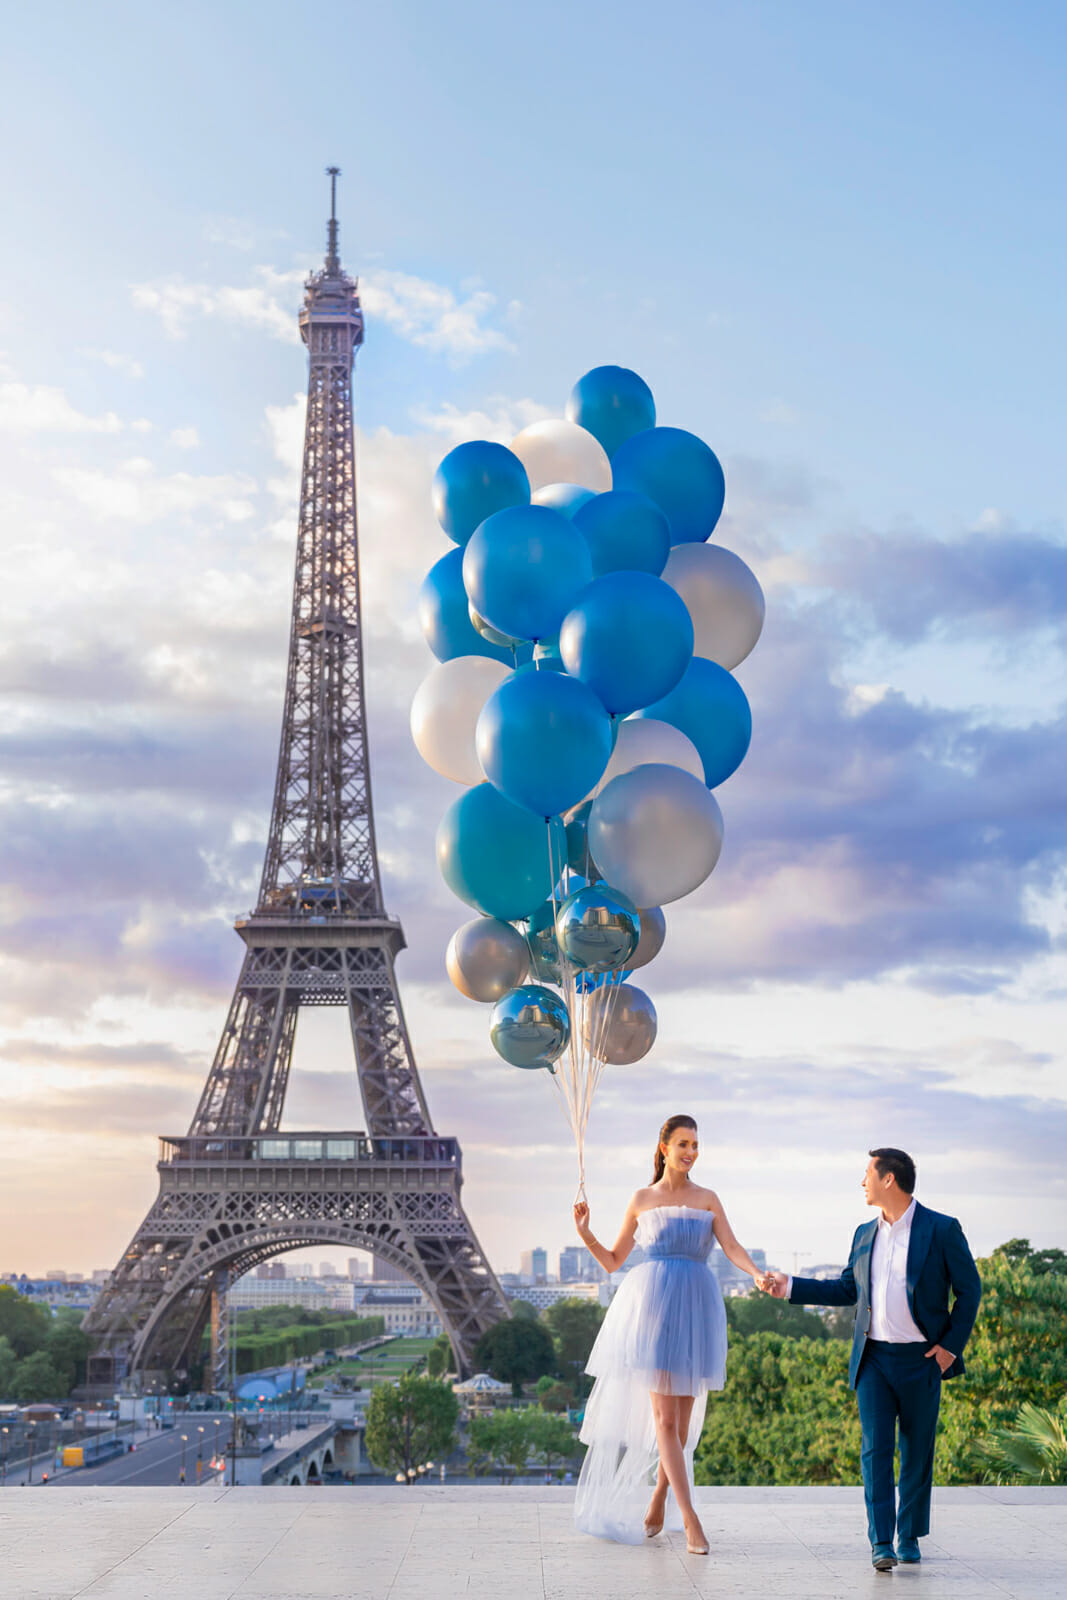 Oversize balloons for your Paris photoshoot